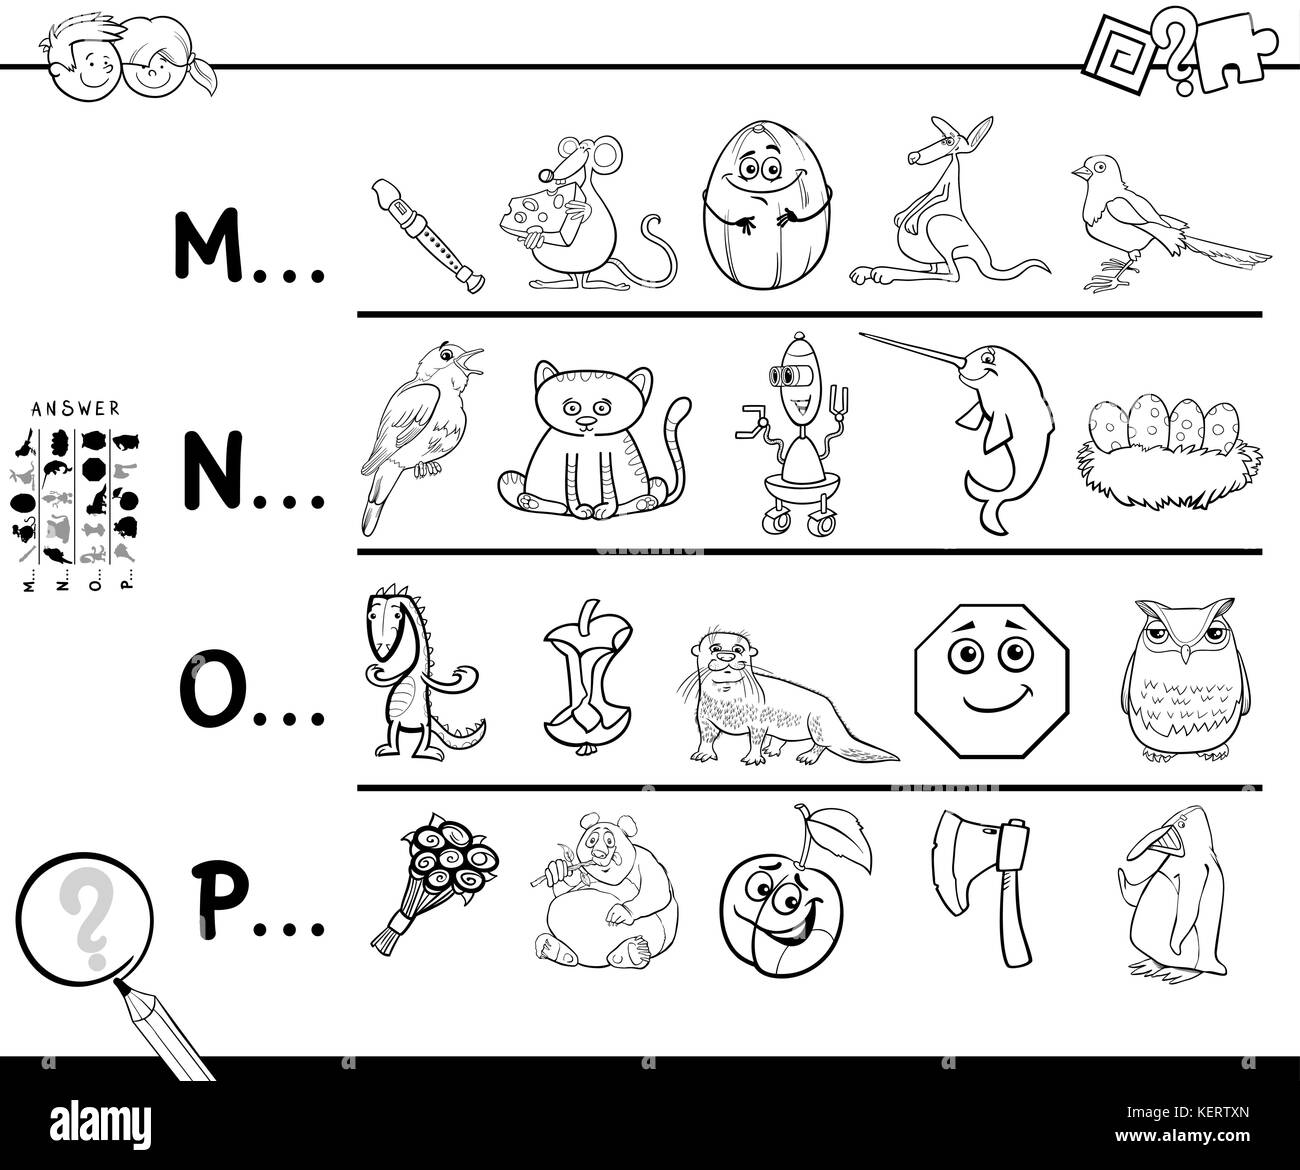 Black and White Cartoon Illustration of Finding Pictures Starting with Referred Letter Educational Game for Kids Coloring Book Stock Vector